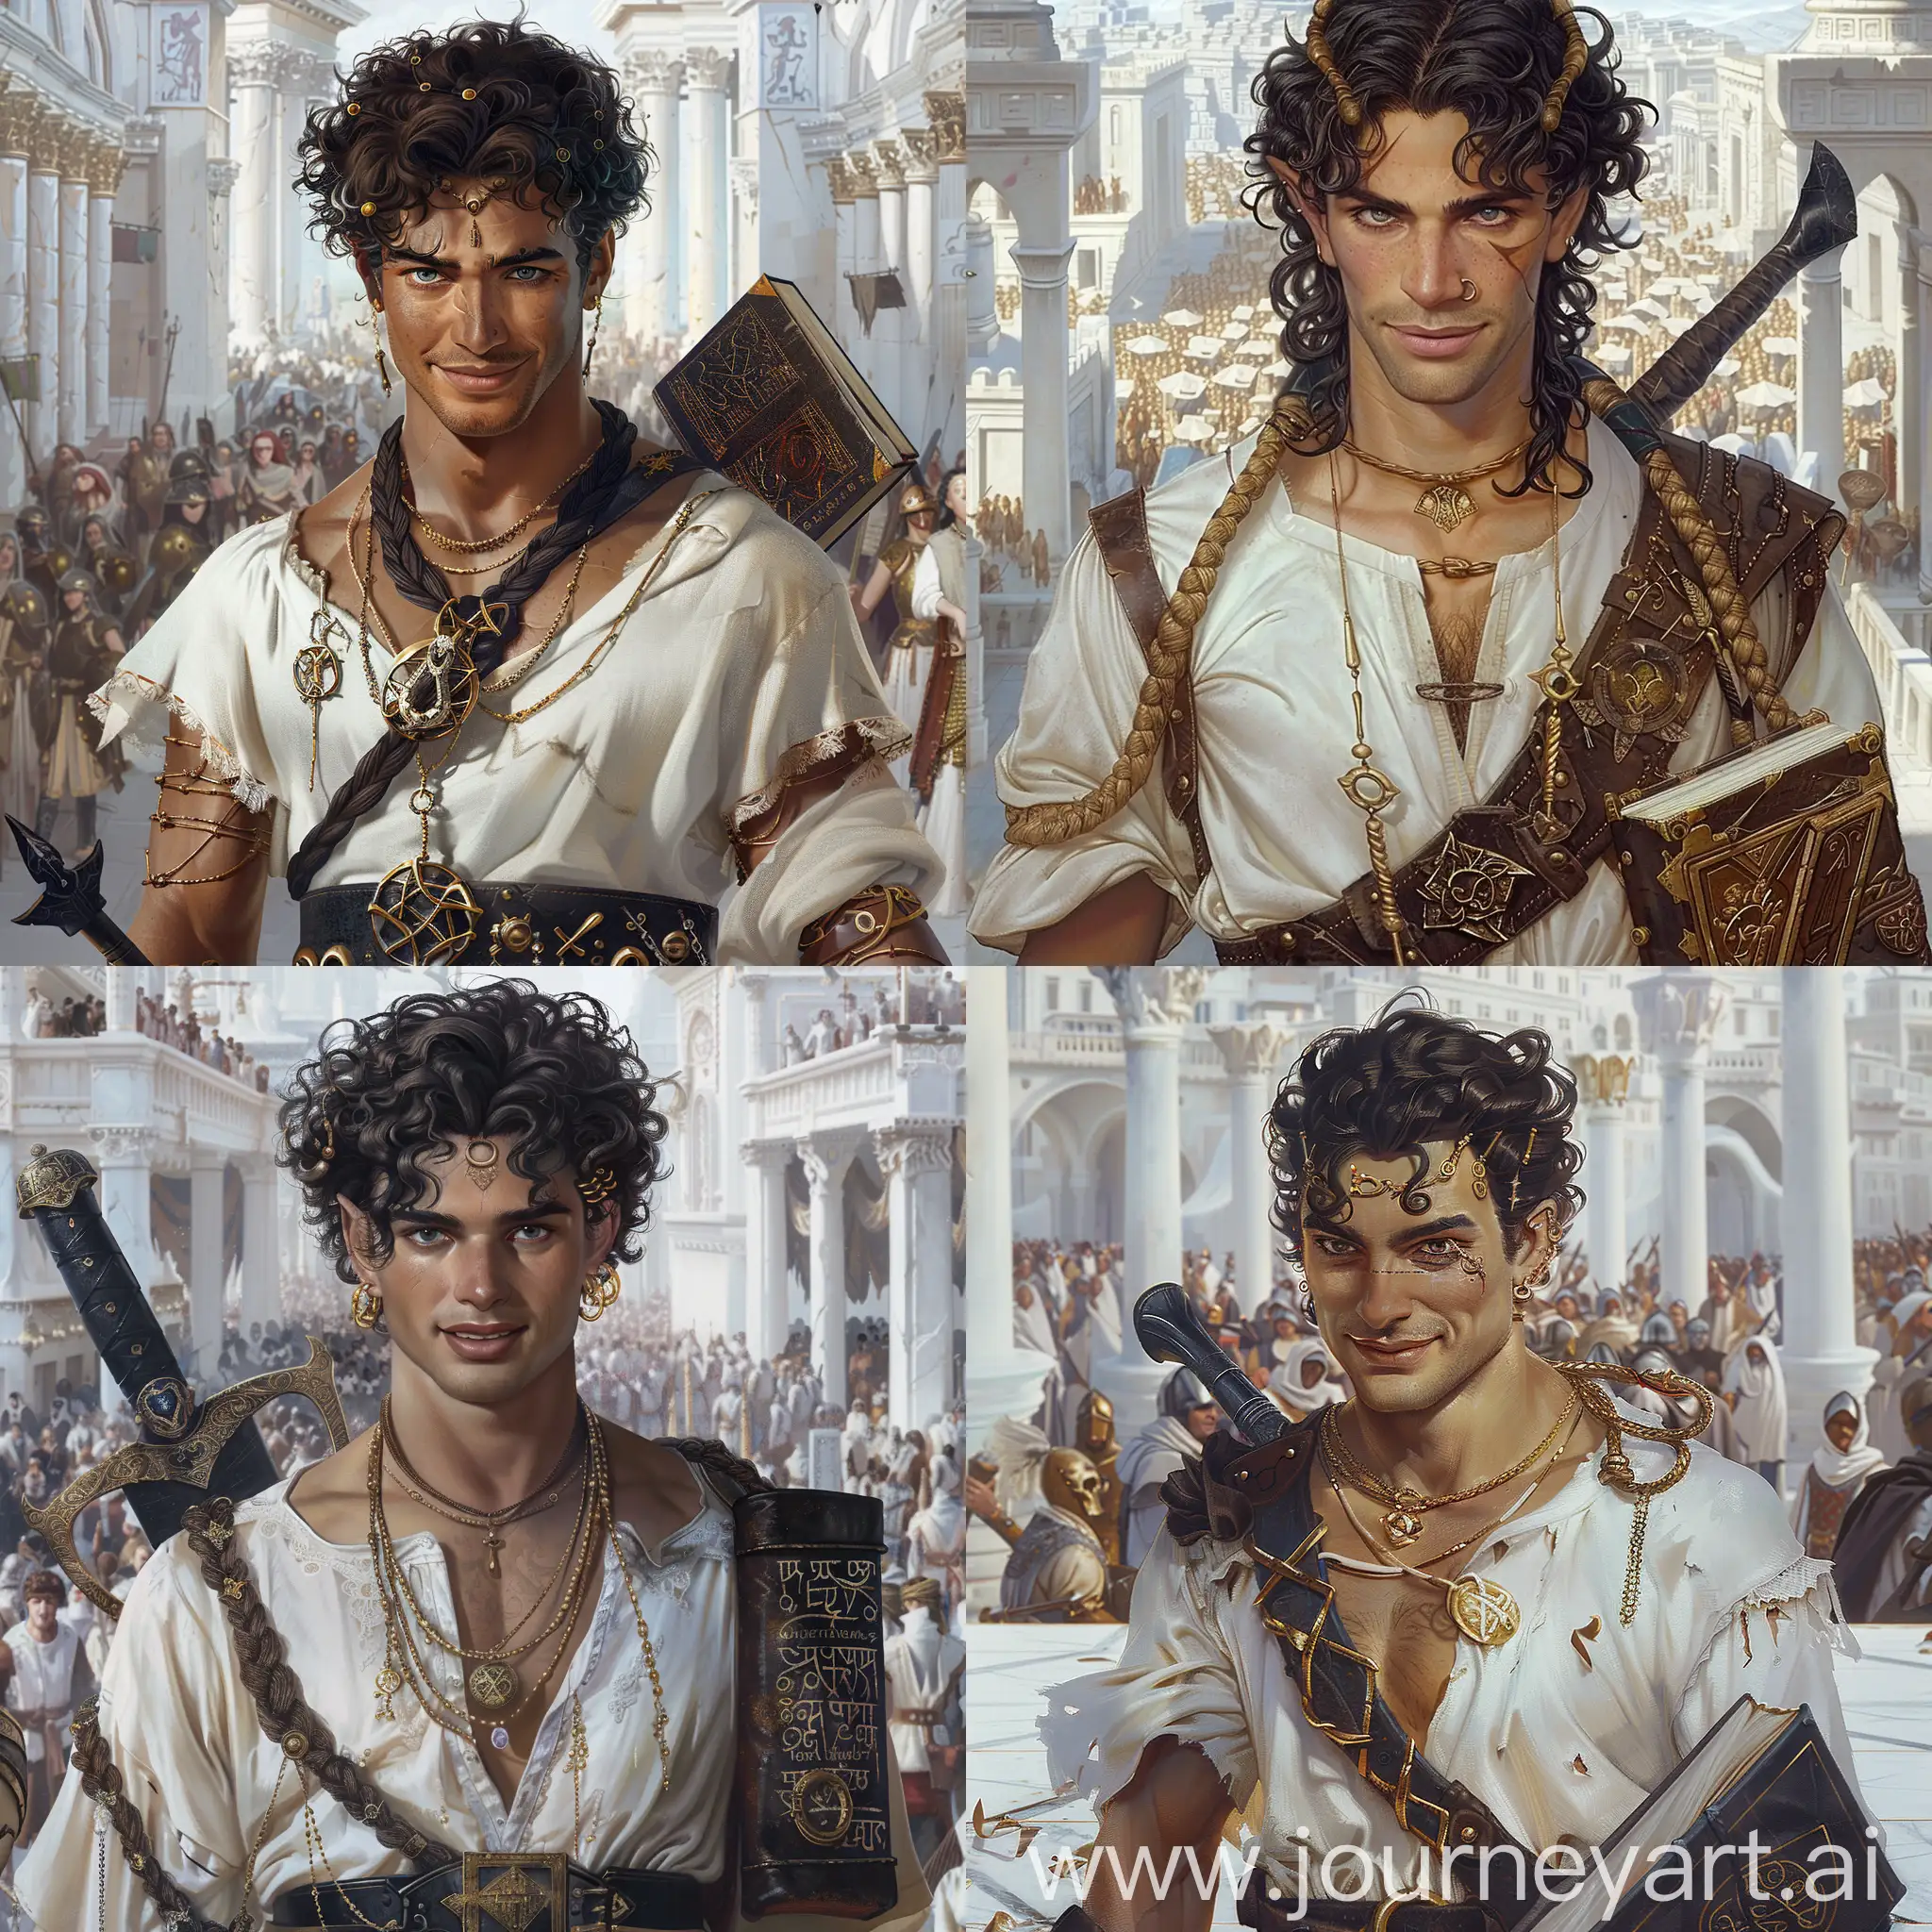 a tanned man with dark brown curly hair, hair braided at the temples, gold jewelry in braids, a soft but courageous face, a kind smile, a beautiful slit of piercing silver eyes, a tall, broad-shouldered guy, a Greek expressive nose and an expressive jaw, wears a book on his belt on the right with strange symbols of dark magic, the book is entangled in chains, on the belt on the left is a black curved sword carrying dark power, wears a beautiful white shirt in medieval style, wears leather armor on the top of the shirt on his chest, and many gold rings on his hands, there are a lot of gold rings in the ears, cinematic perspective, cinematic lighting, the background is a crowded medieval city made of white marble,